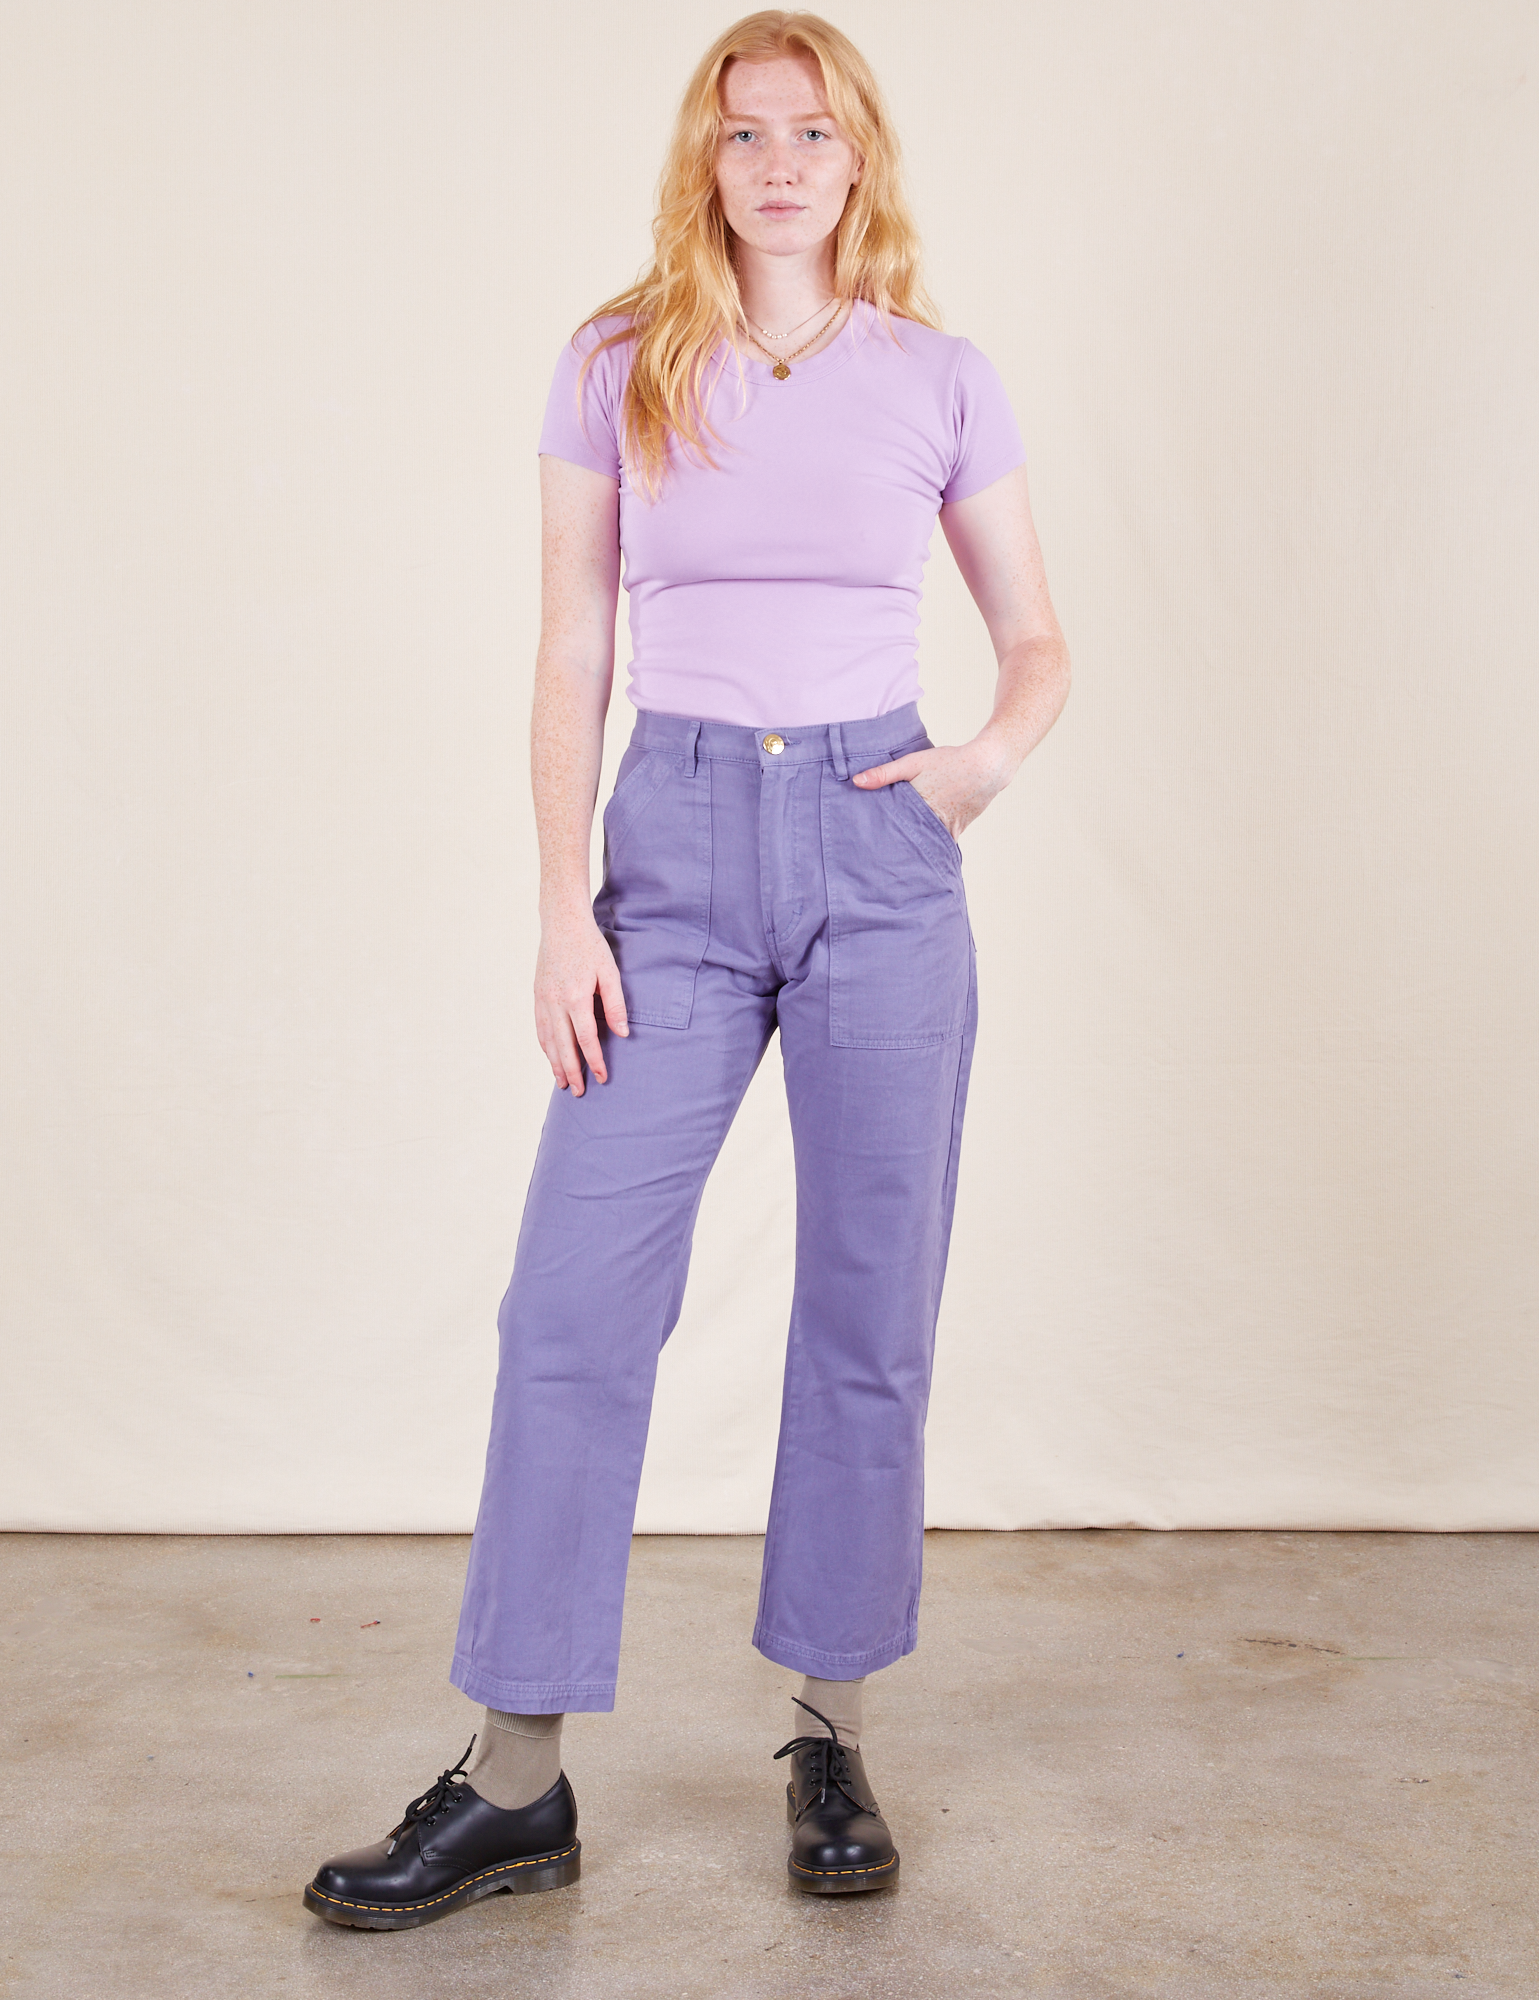 Margaret is 5'11" and wearing XXS Work Pants in Faded Grape and a Baby Tee